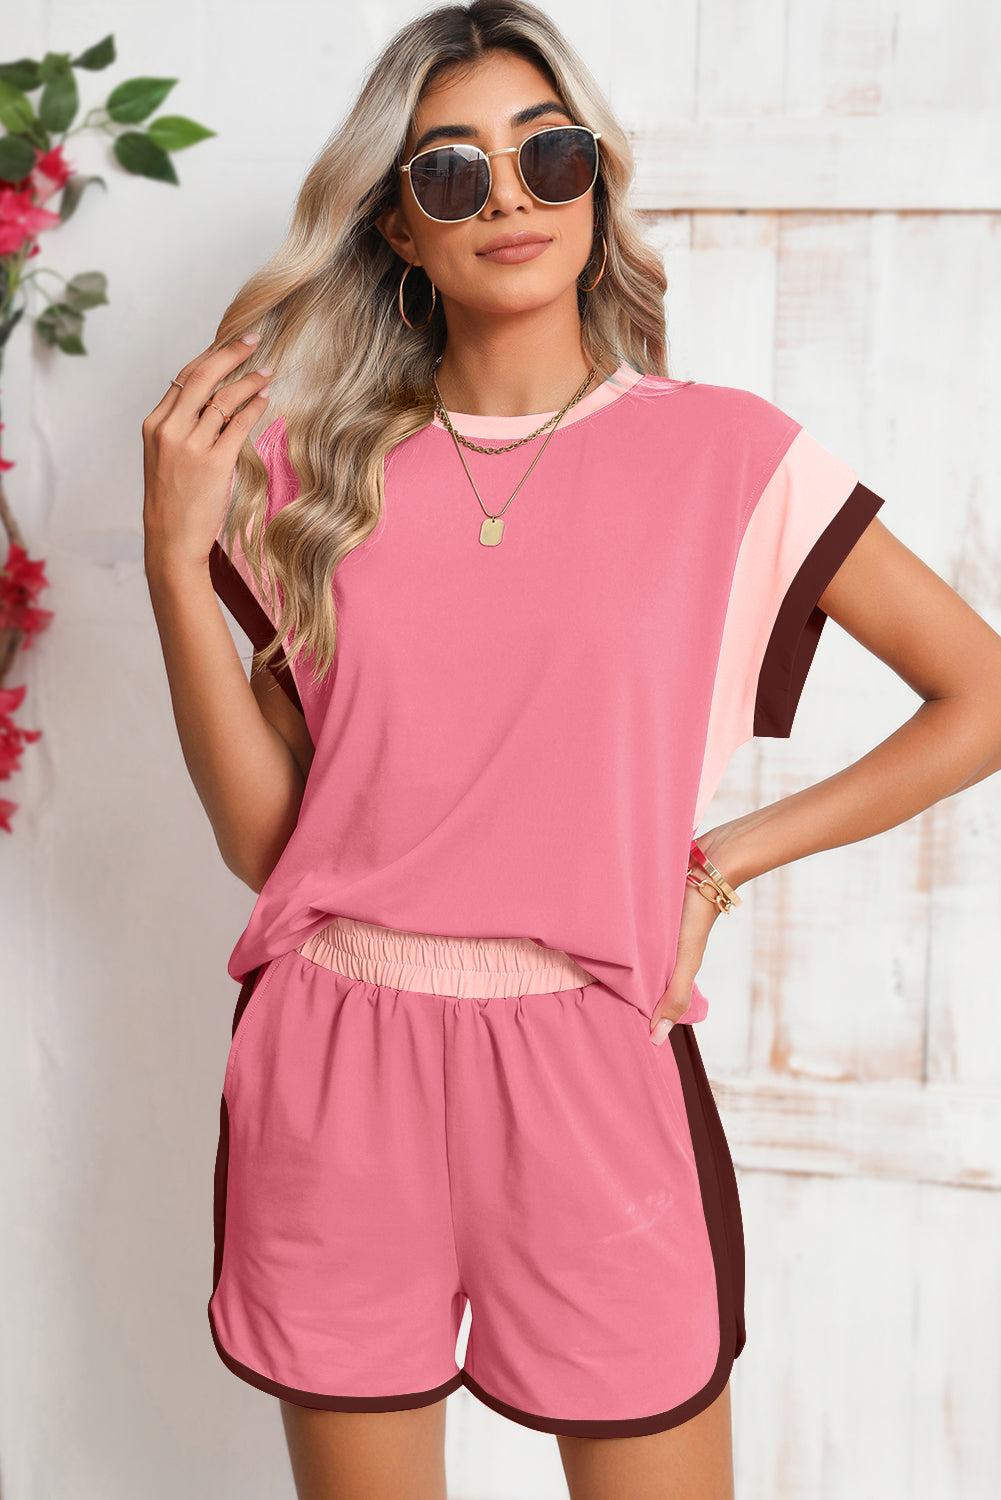 Pink and brown sporty short-sleeve top and shorts